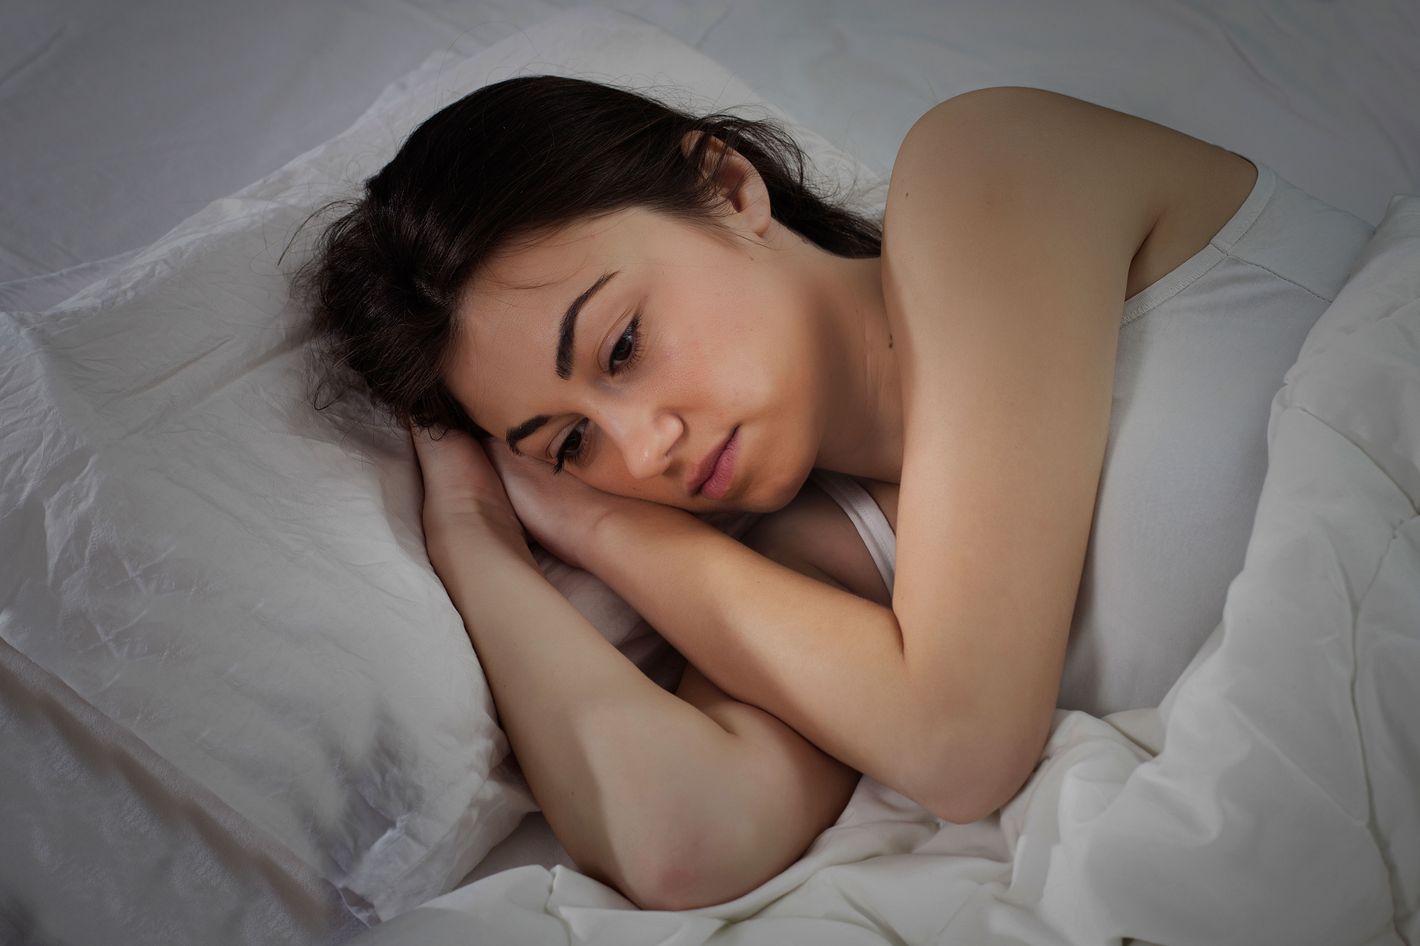 Why Do Women Have a Harder Time Sleeping Than Men?